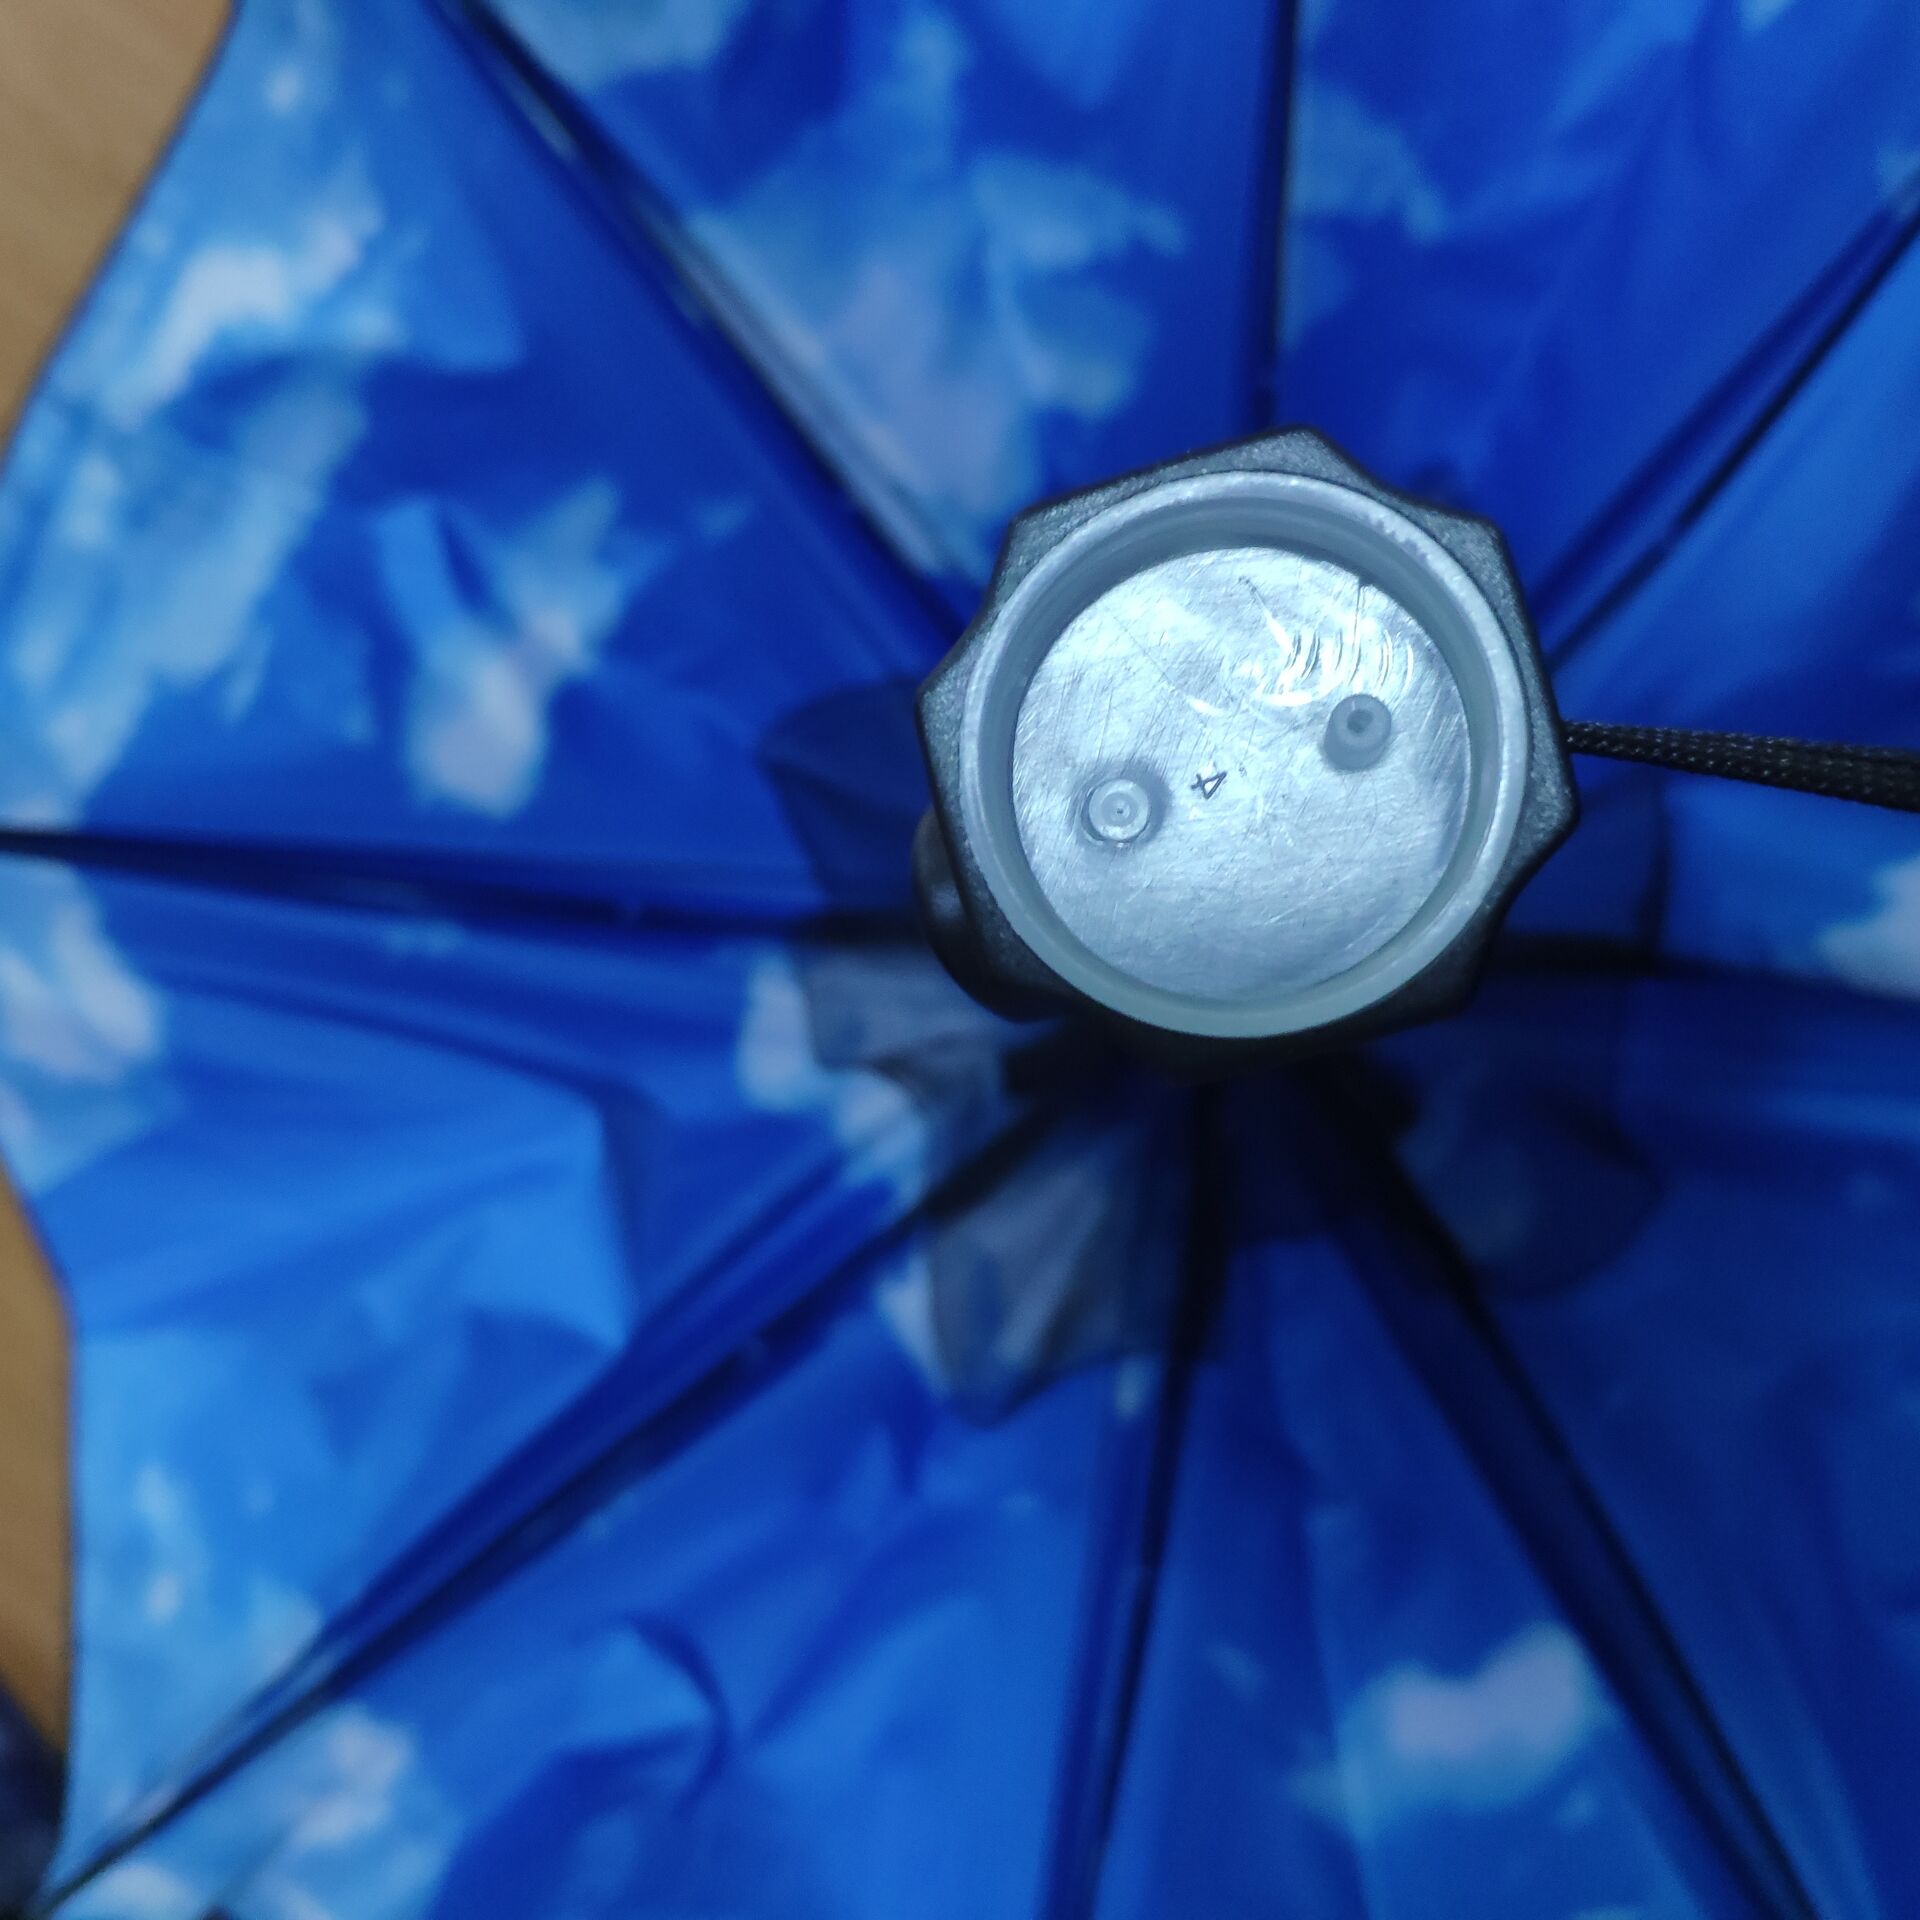 Umbrella with Fan and Mist Spray